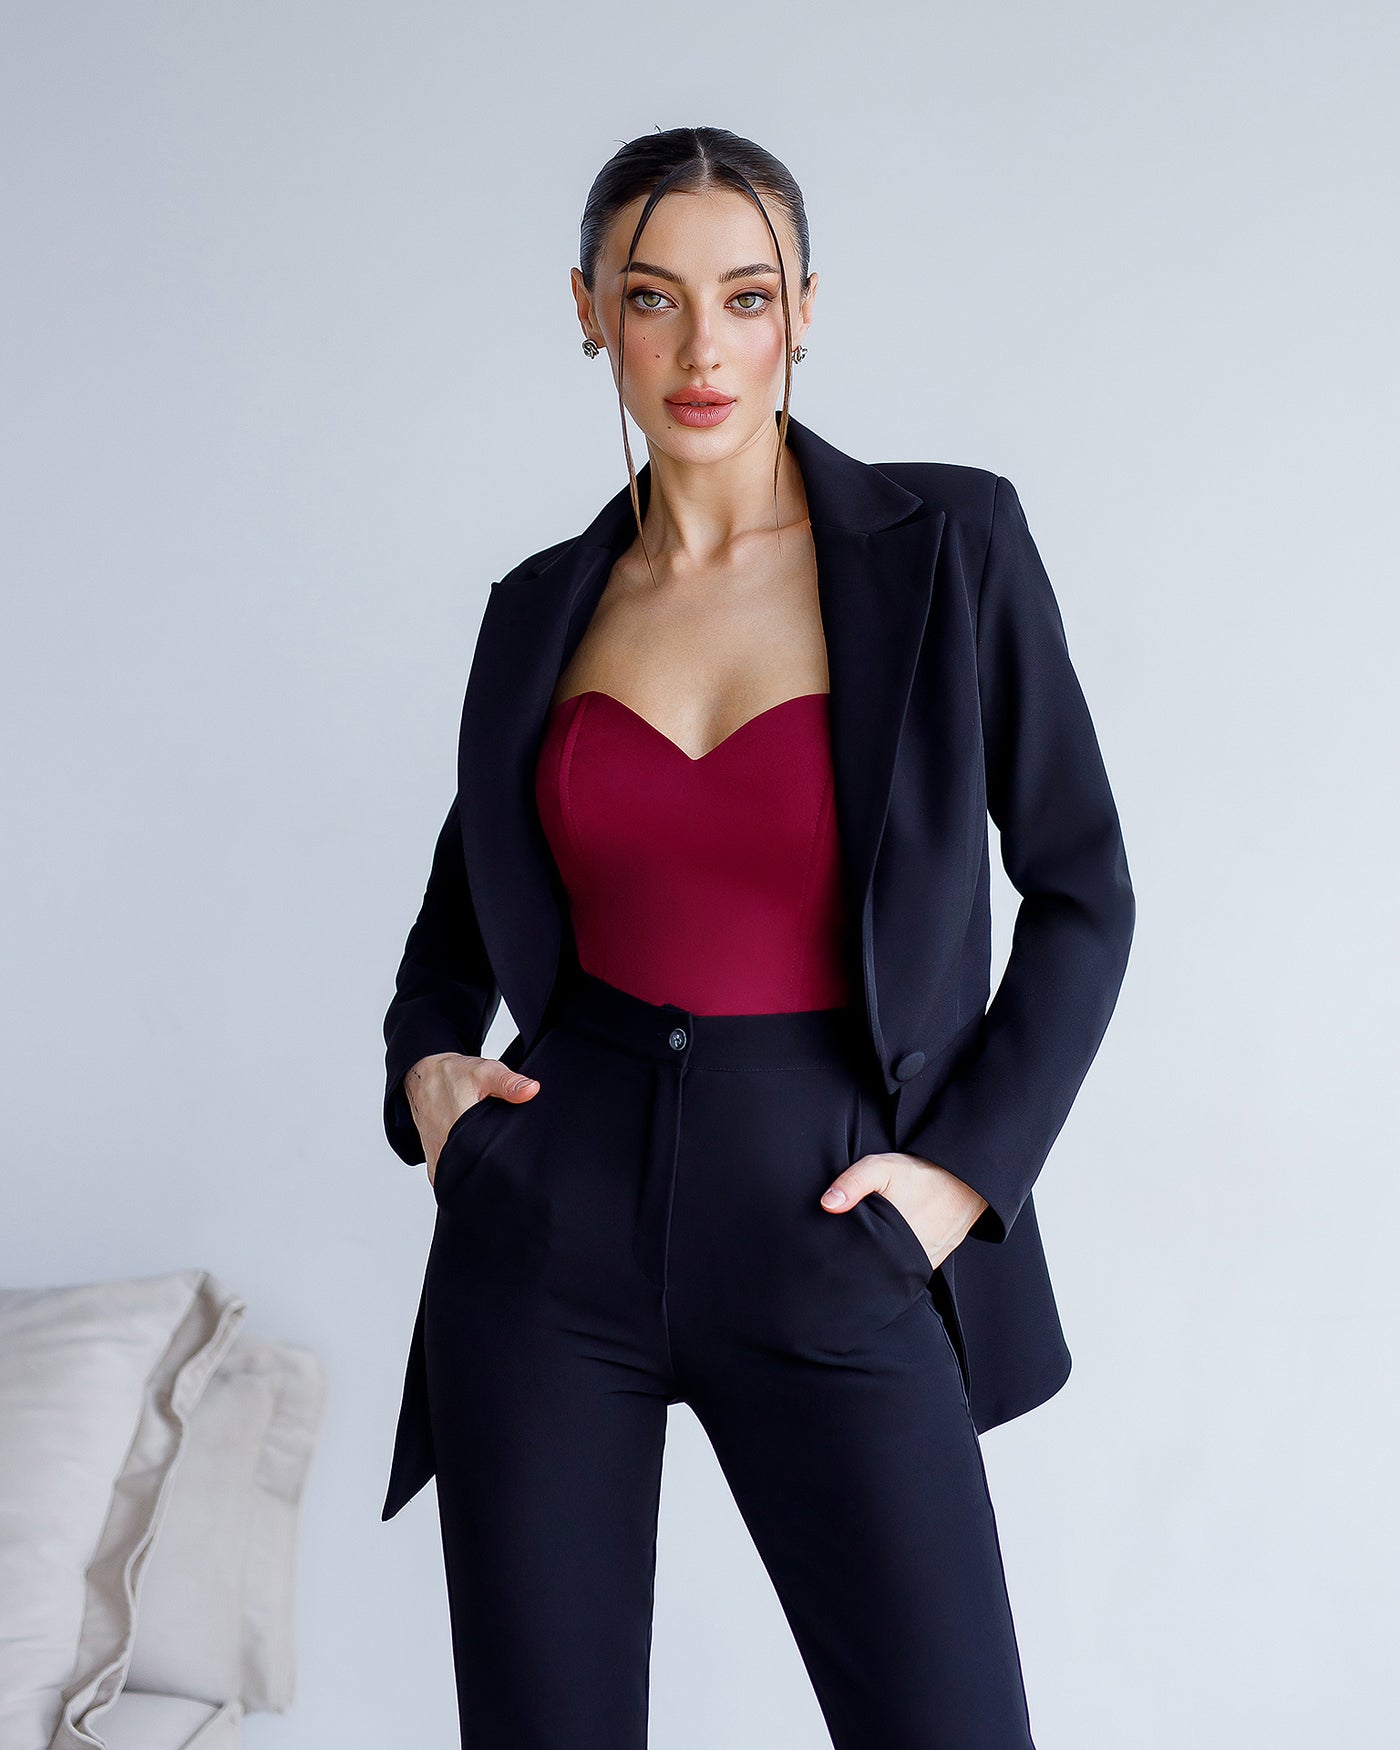 Black SINGLE-BREASTED SUIT 2-PIECE (ARTICLE 421)